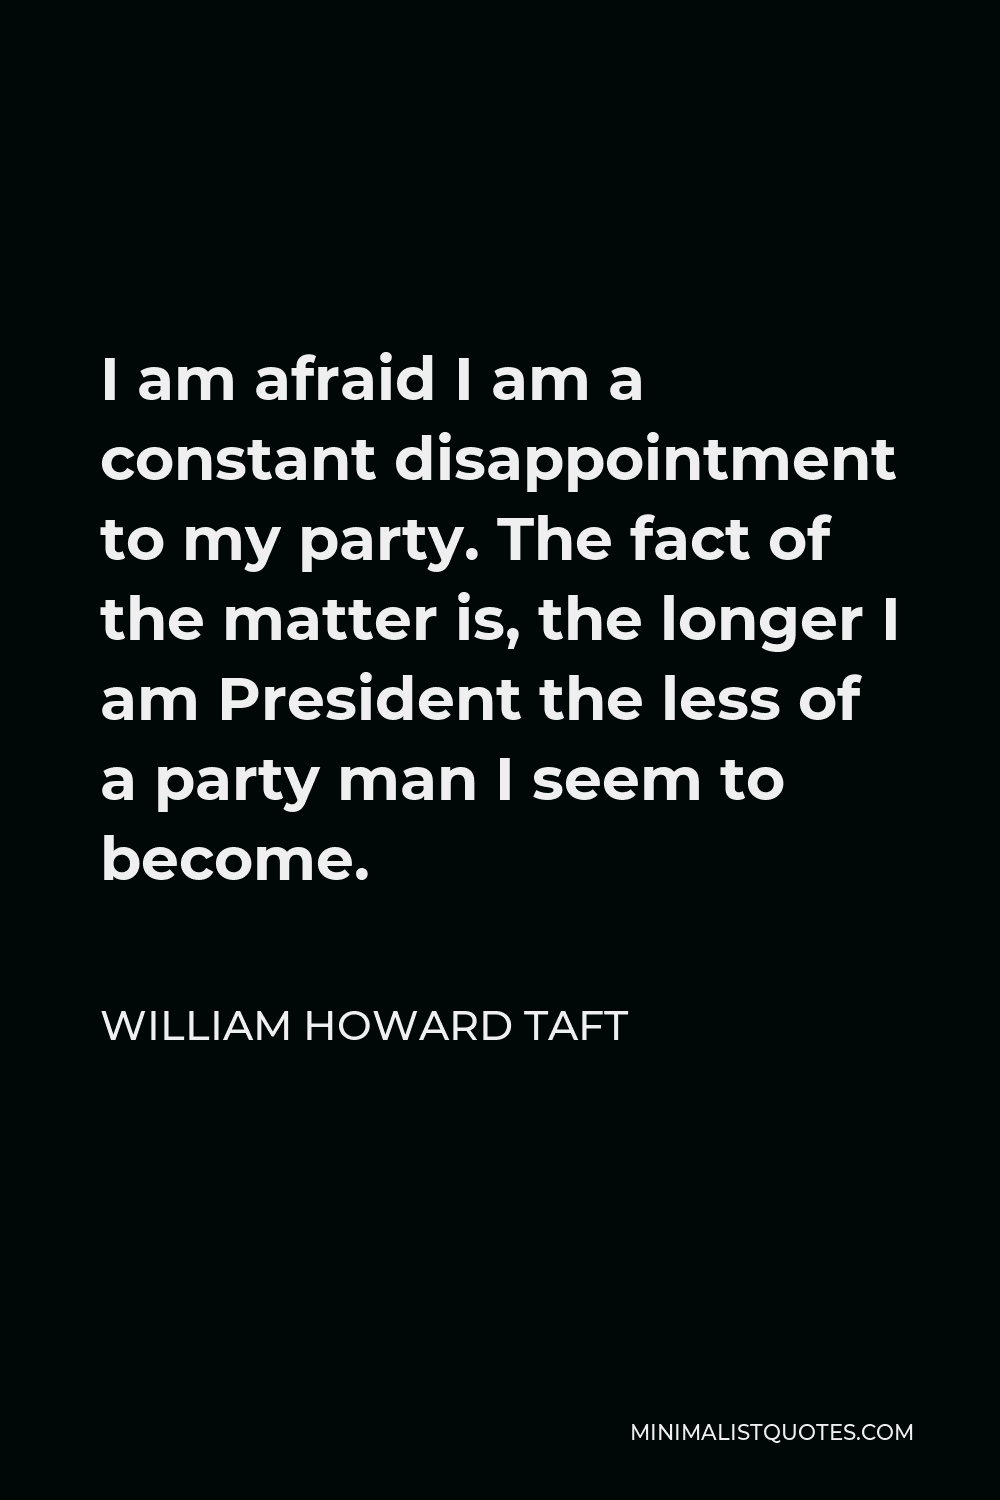 William Howard Taft Quote - I am afraid I am a constant disappointment to my party. The fact of the matter is, the longer I am President the less of a party man I seem to become.